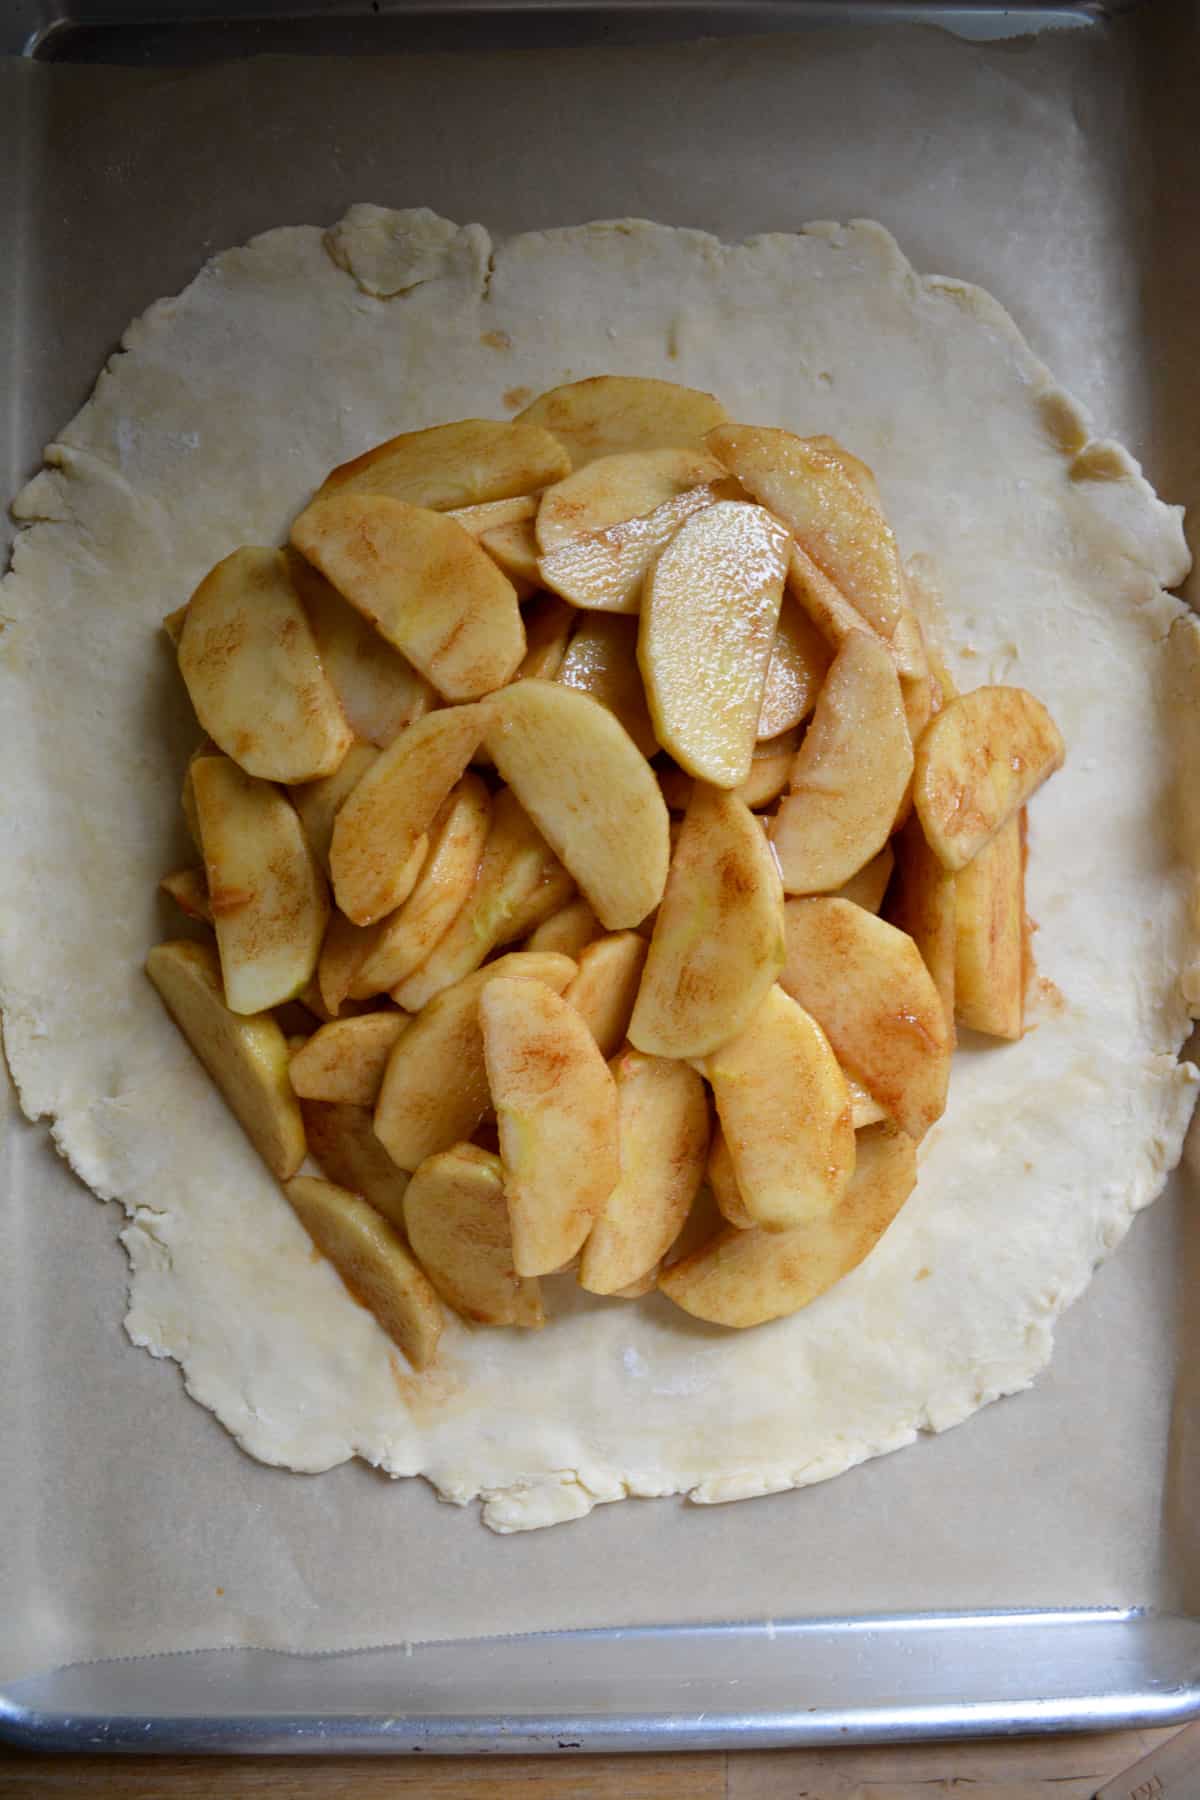 The pie dough topped with the spiced apples.